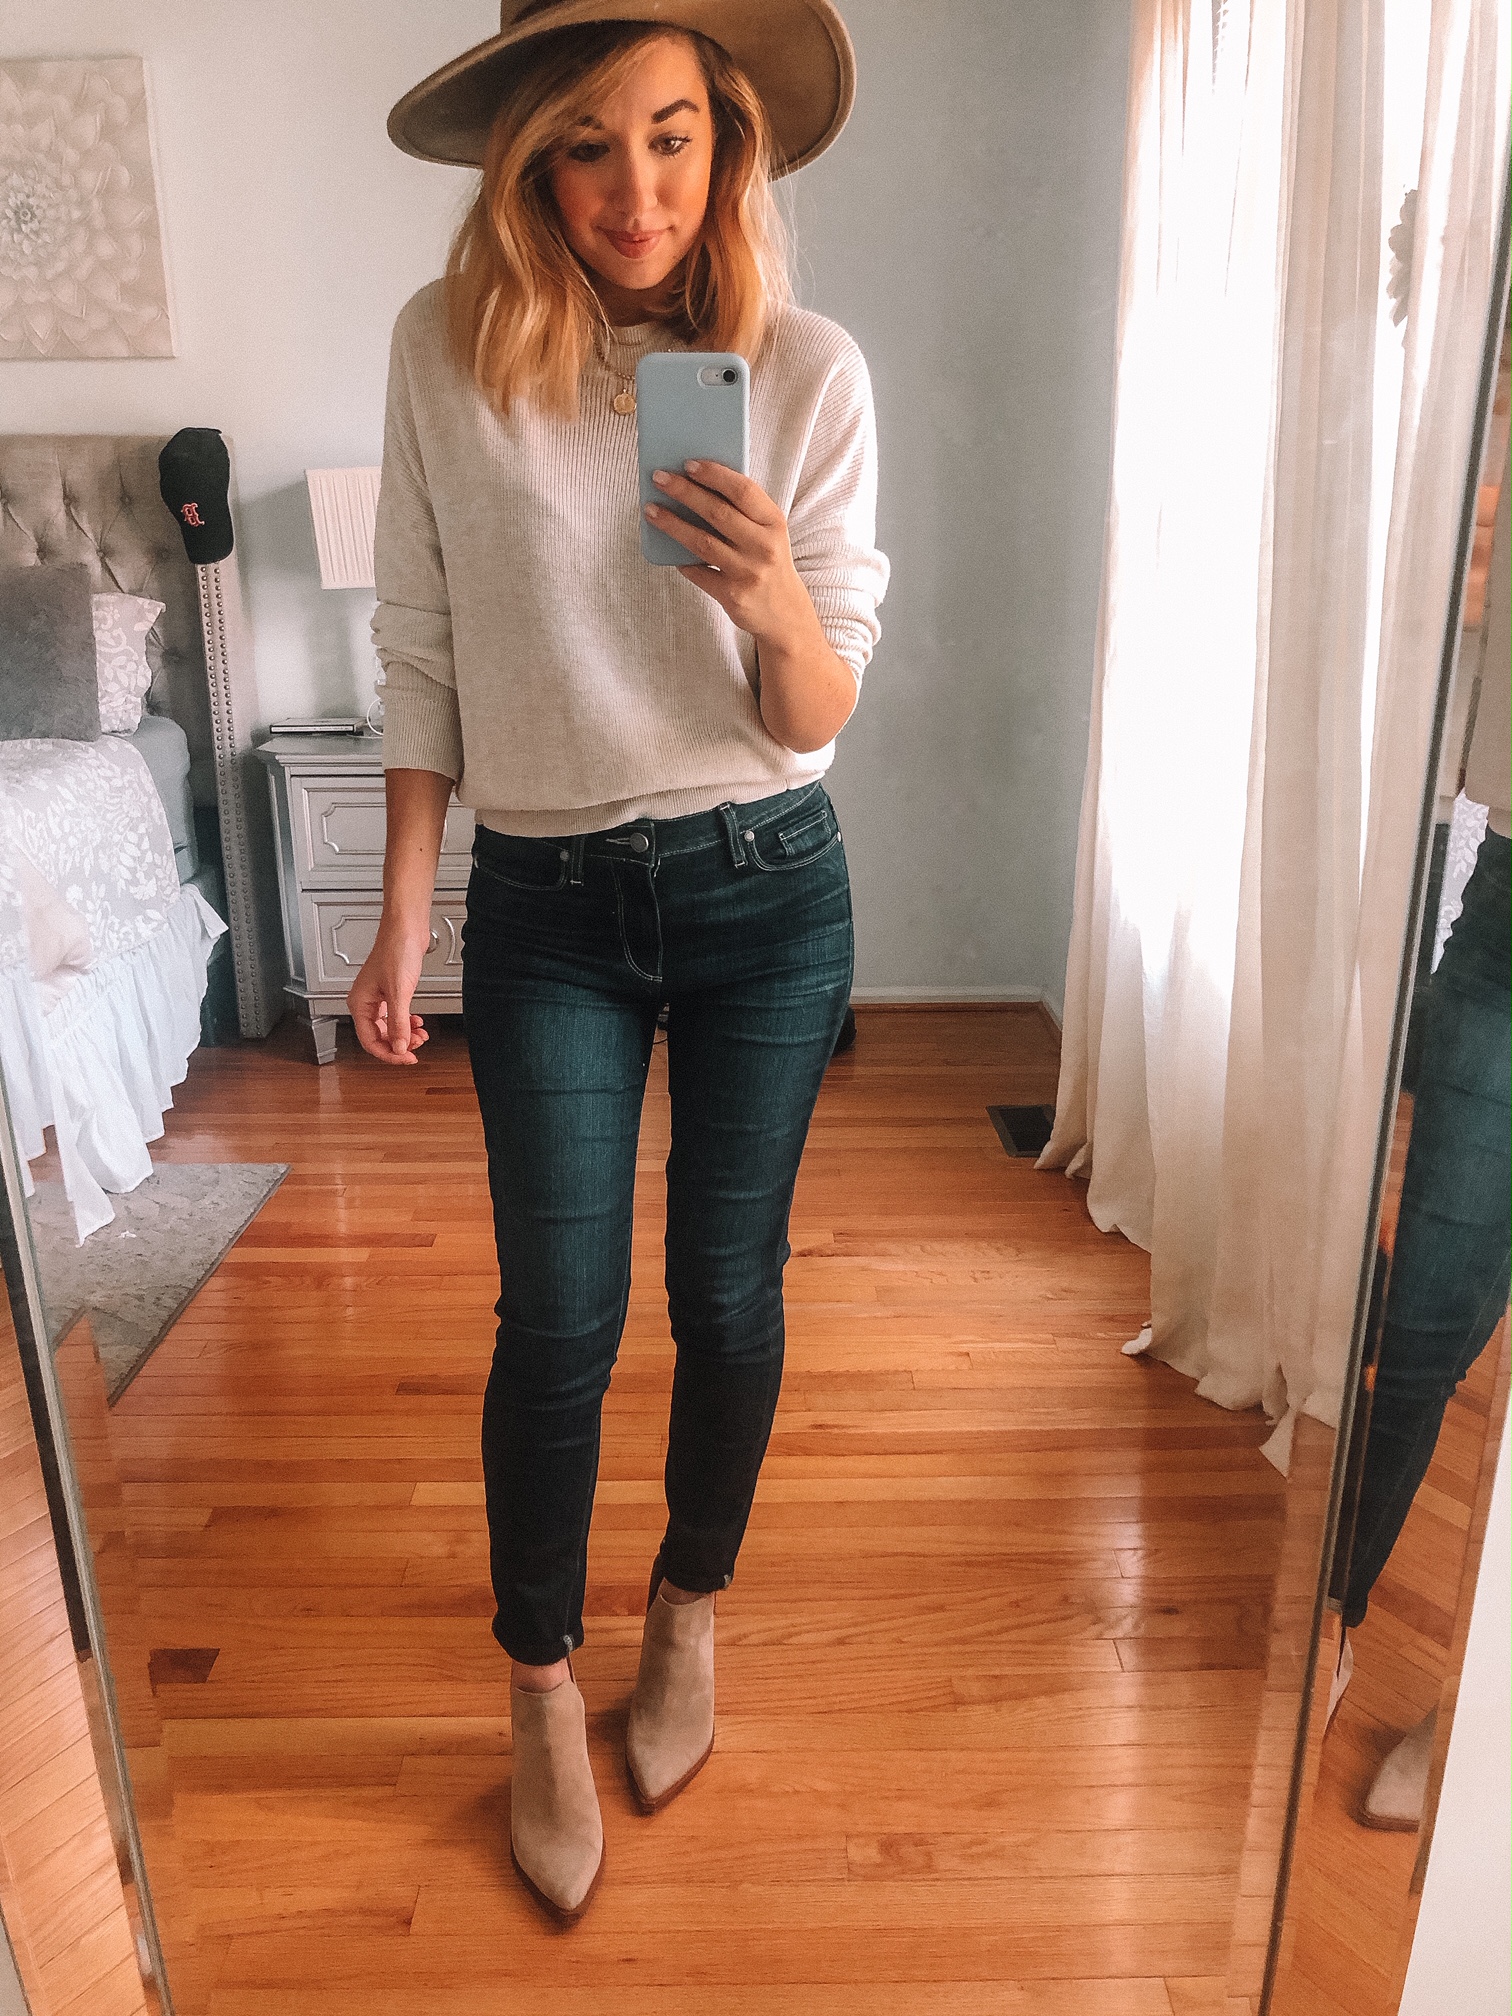 Rosy Outlook: Nordstrom Anniversary Sale 2020 Items I Own & Love